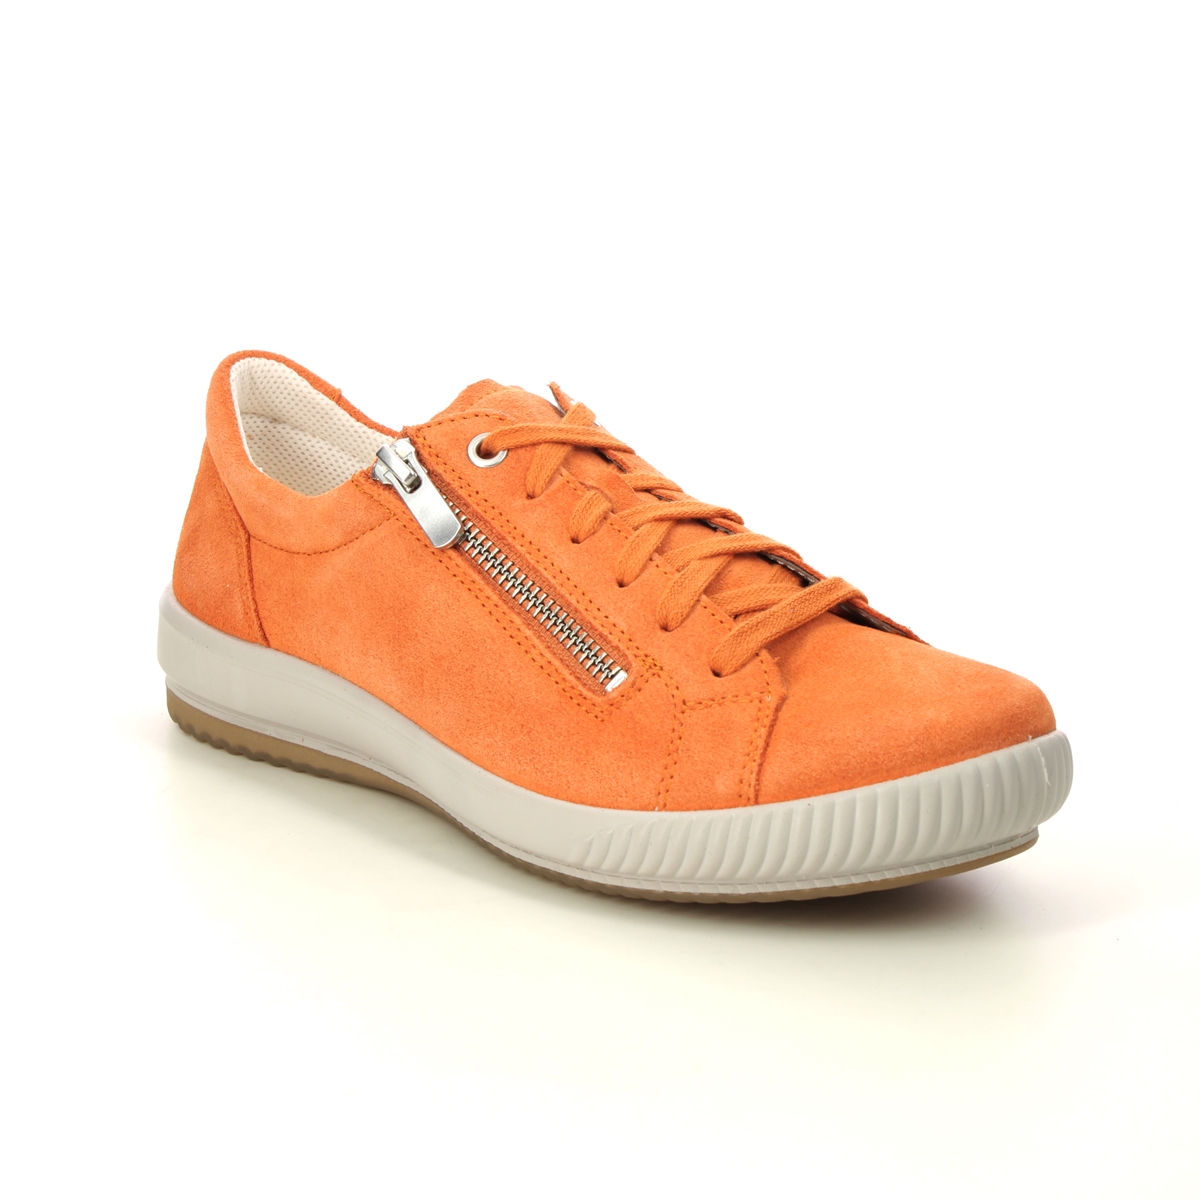 Legero Tanaro 5 Zip Orange suede Womens lacing shoes 2001162-5450 in a Plain Leather in Size 7